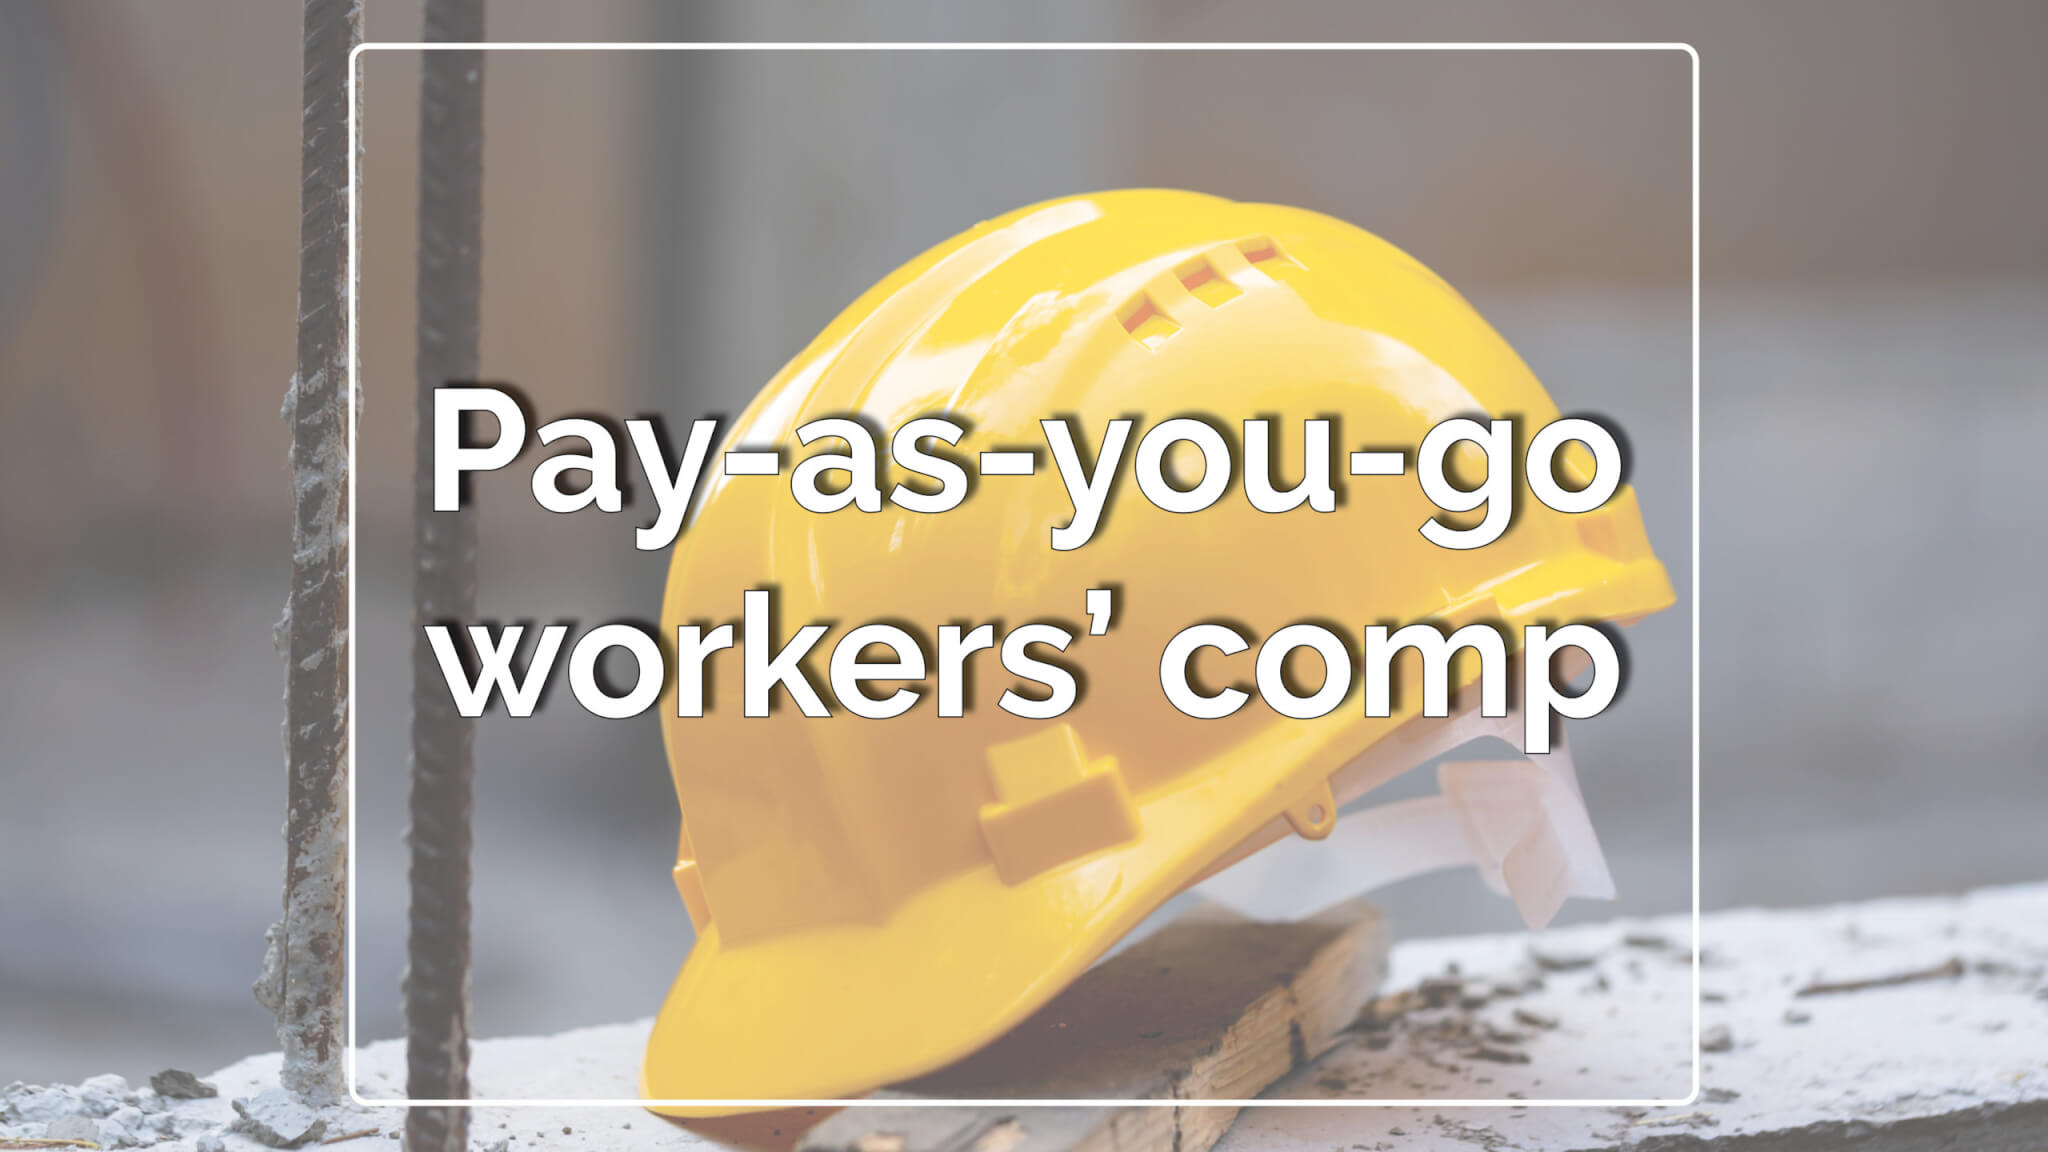 Pay-As-You-Go Workers’ Comp